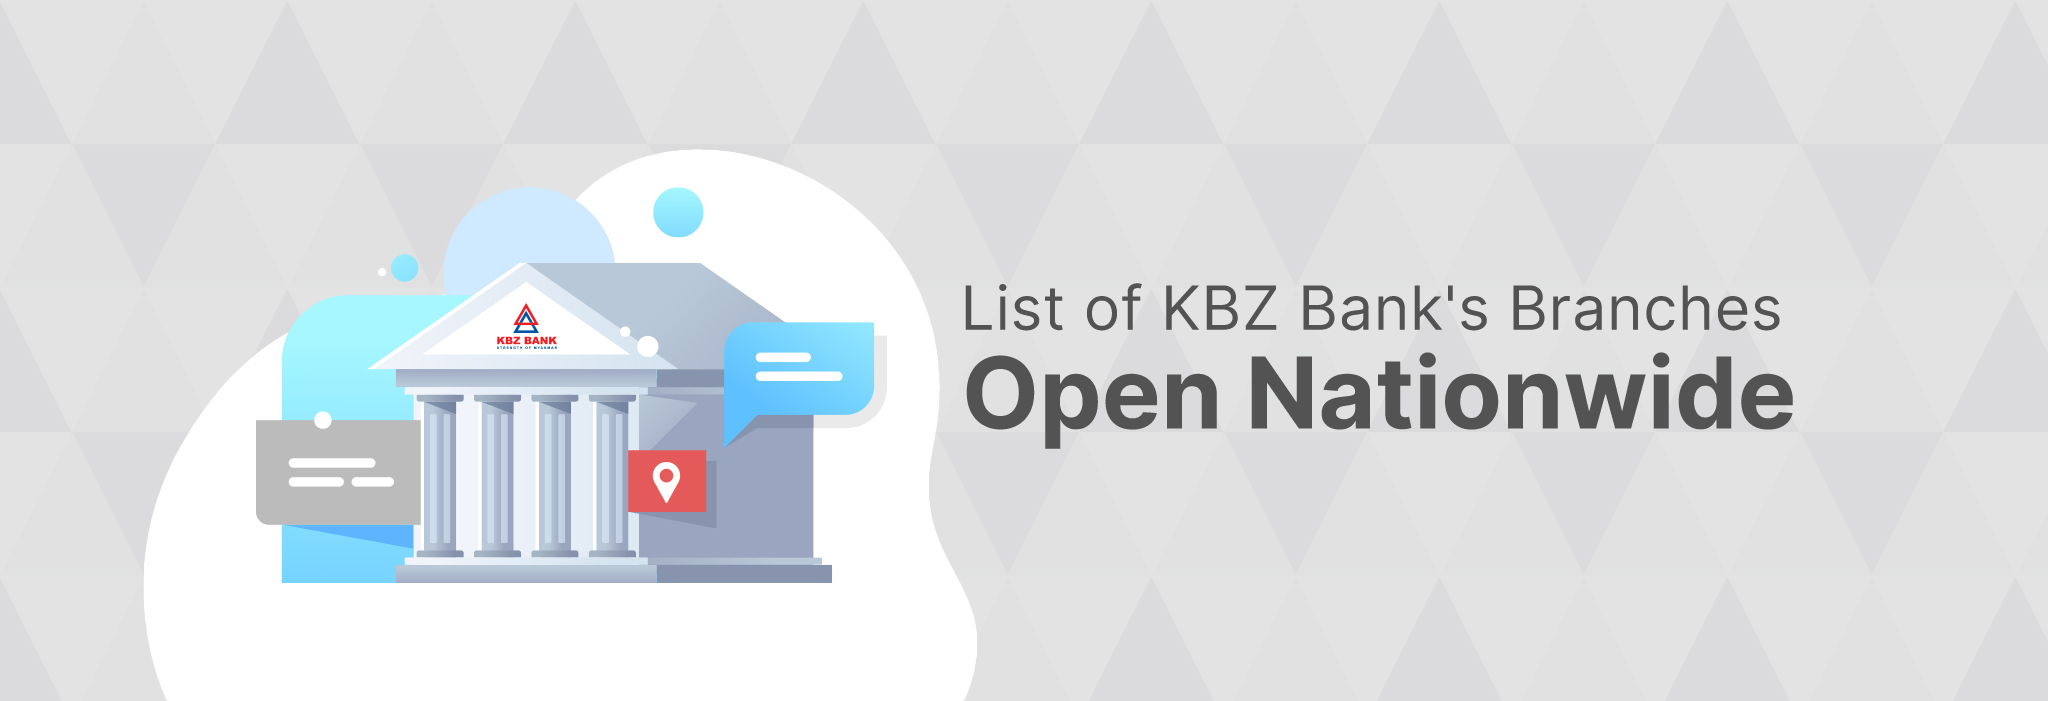 List of KBZ Bank Branches